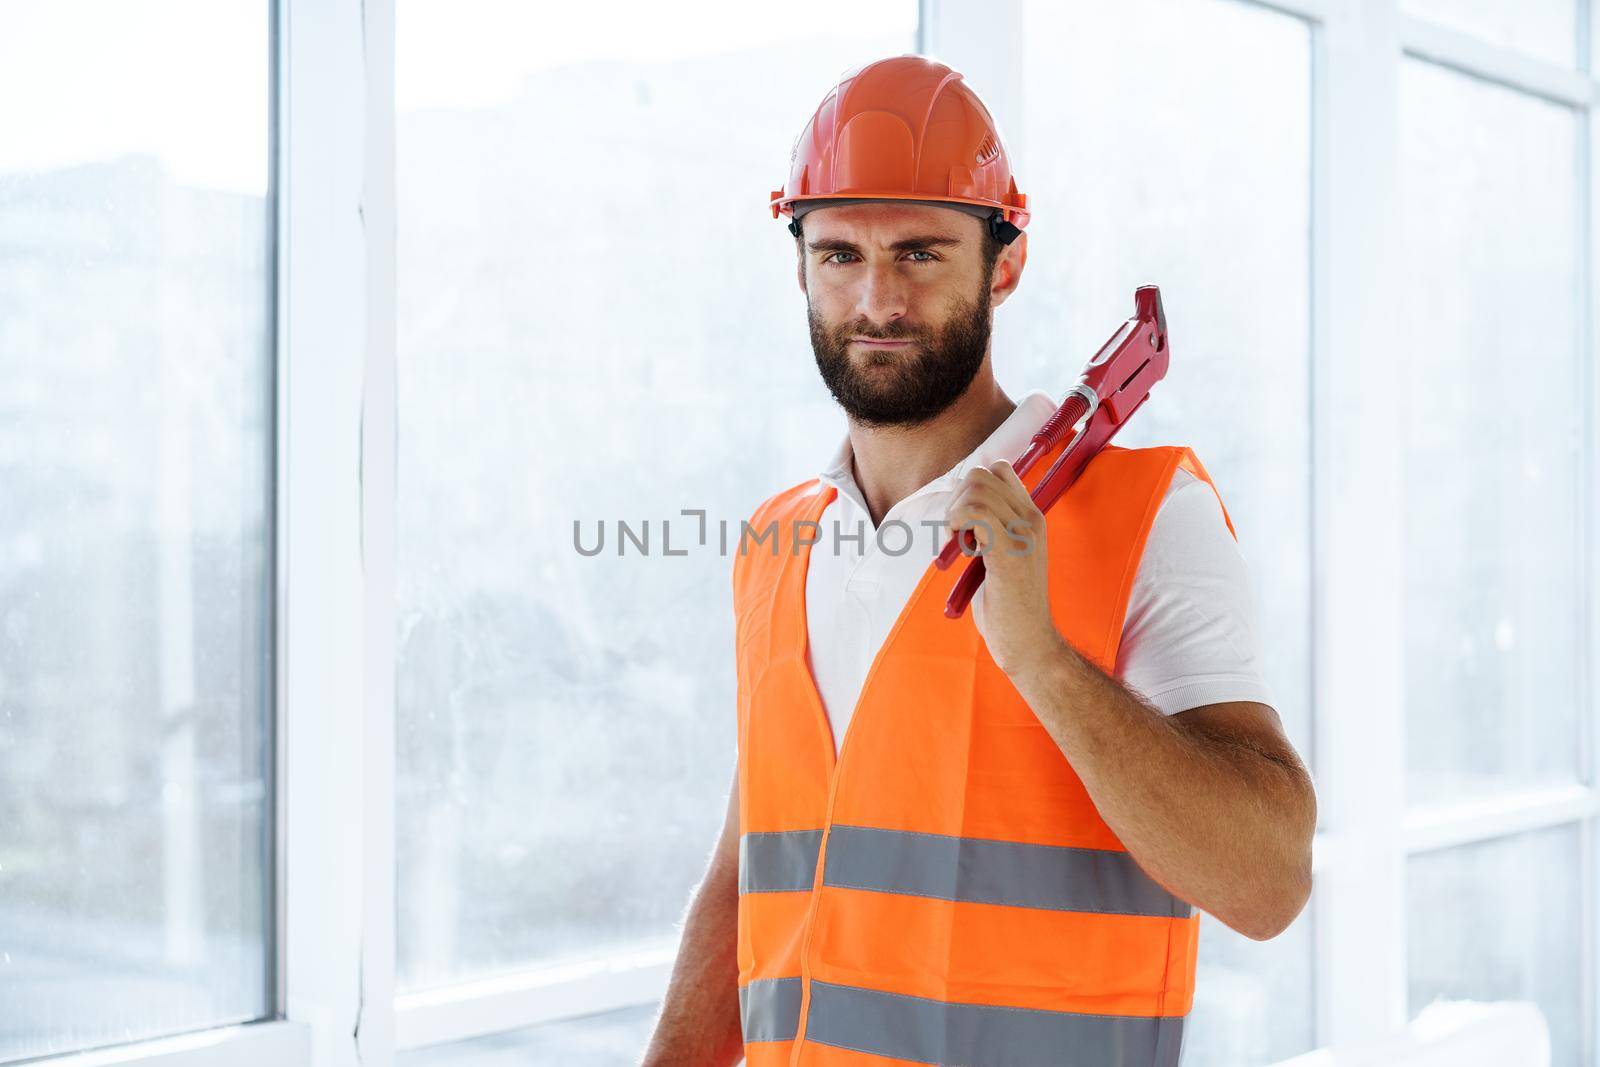 Young male plumber in workwear holding pipe wrench on a construction site indoors